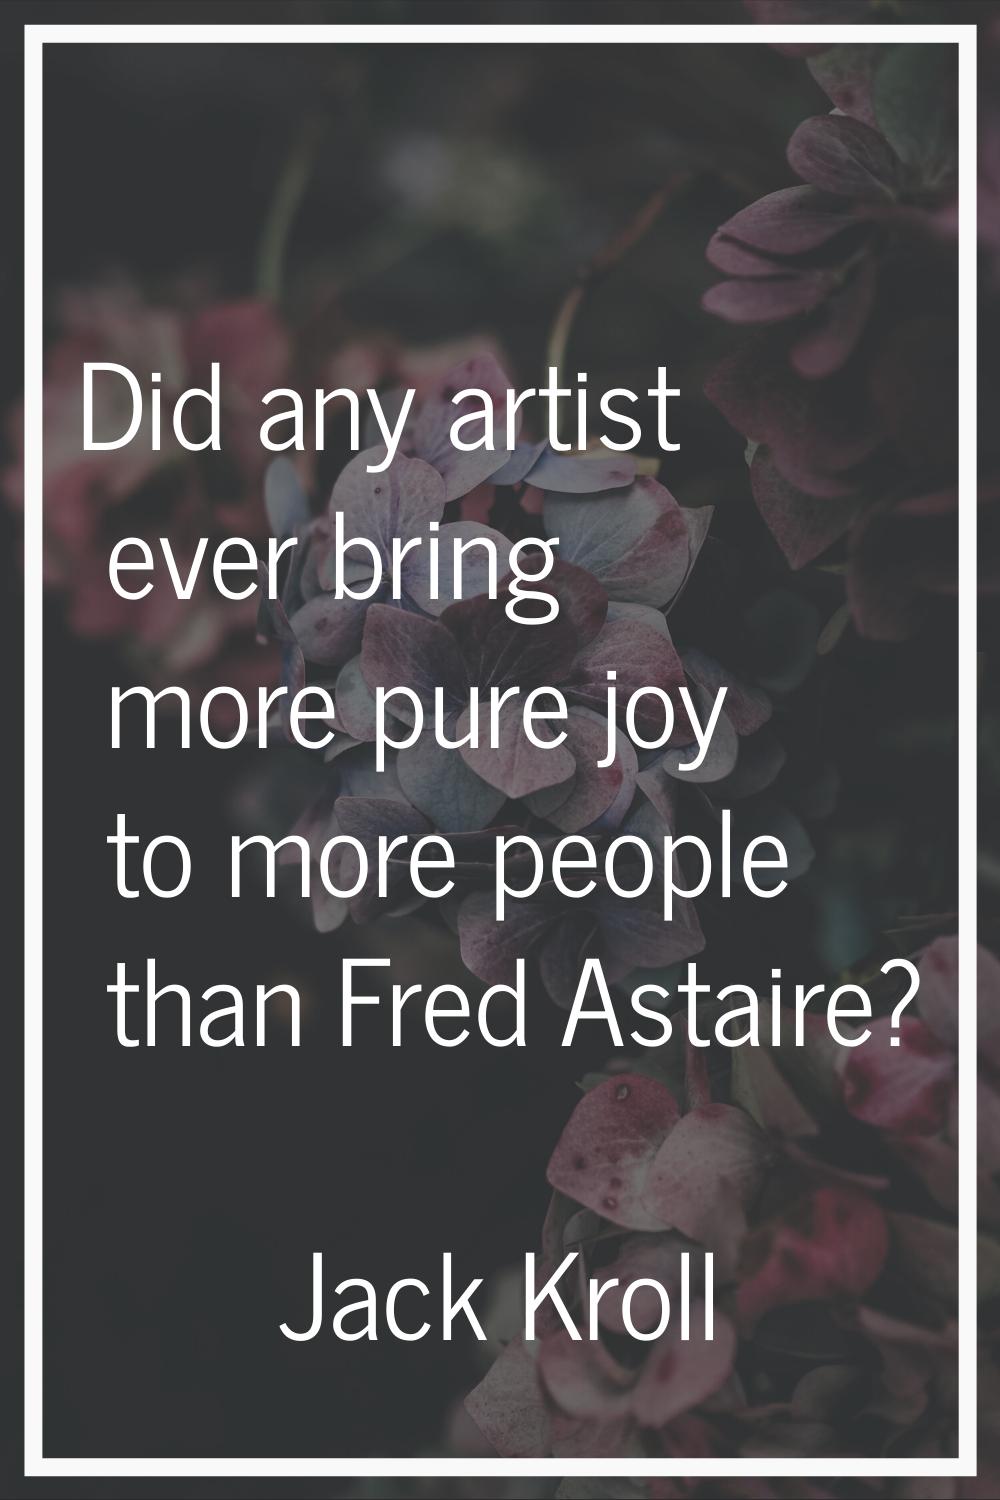 Did any artist ever bring more pure joy to more people than Fred Astaire?